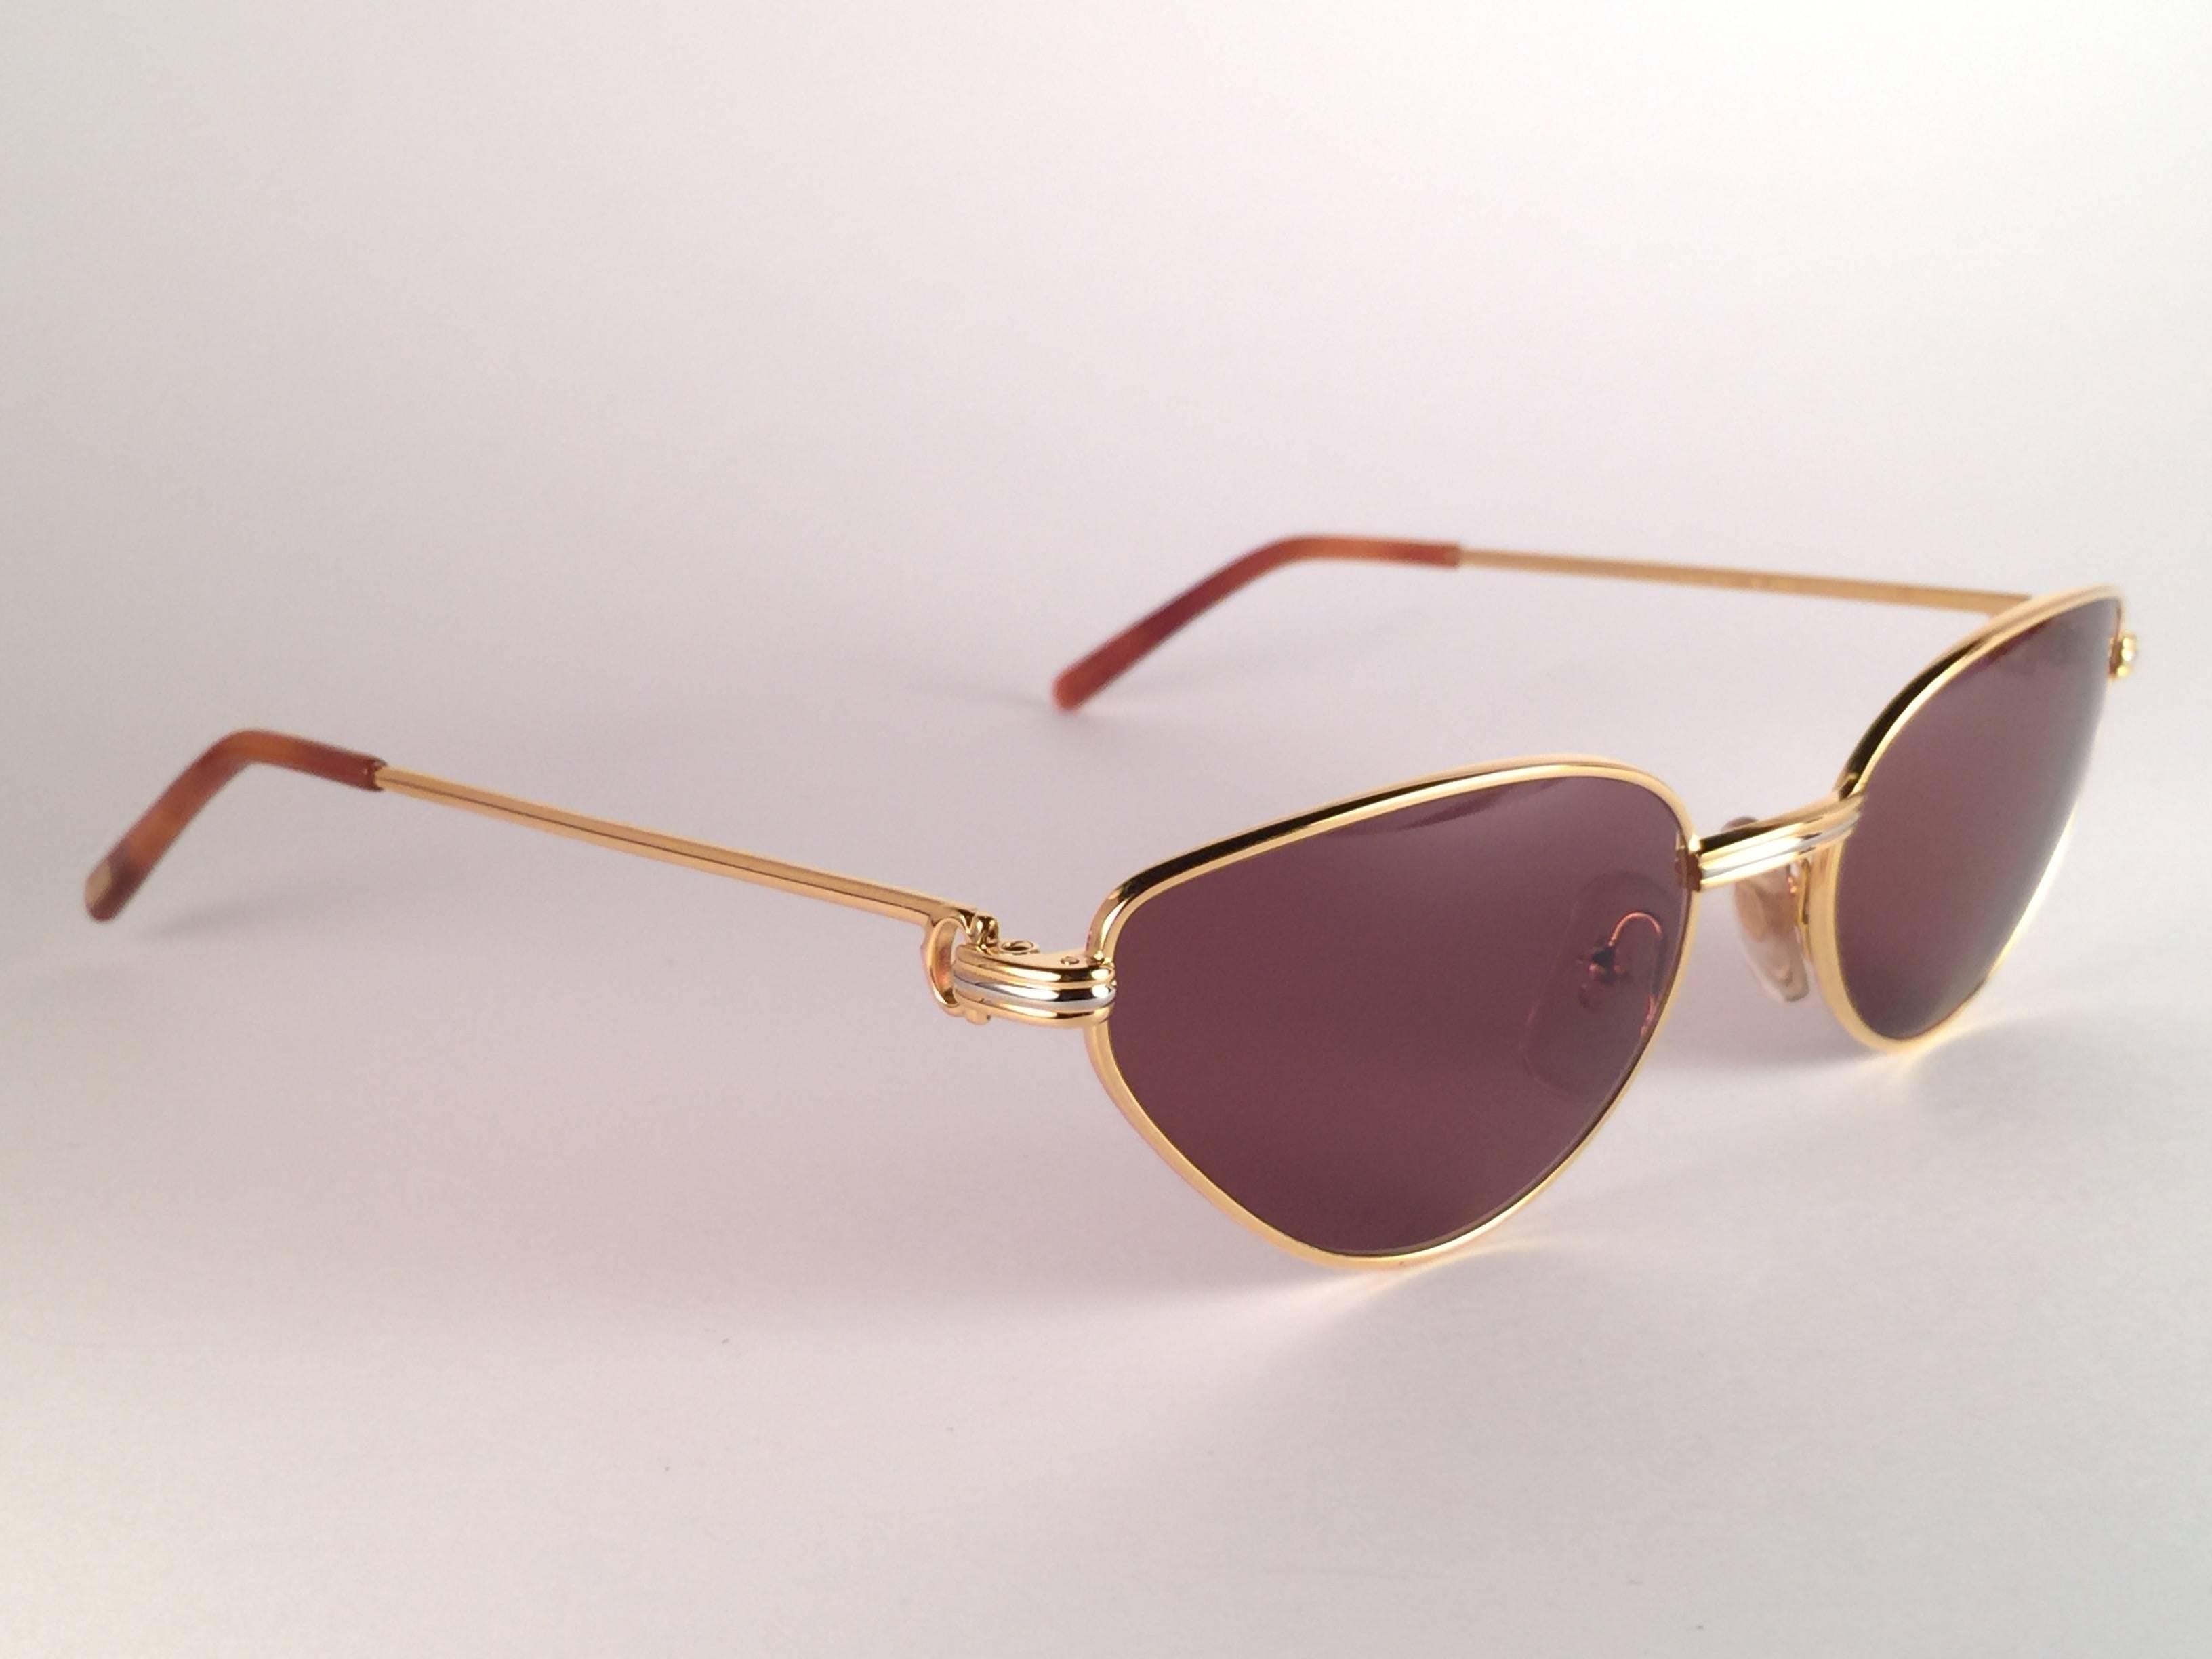 New Cartier Rivoli Vendome 52mm Cat Eye Sunglasses 18k Heavy Plated France In New Condition For Sale In Baleares, Baleares